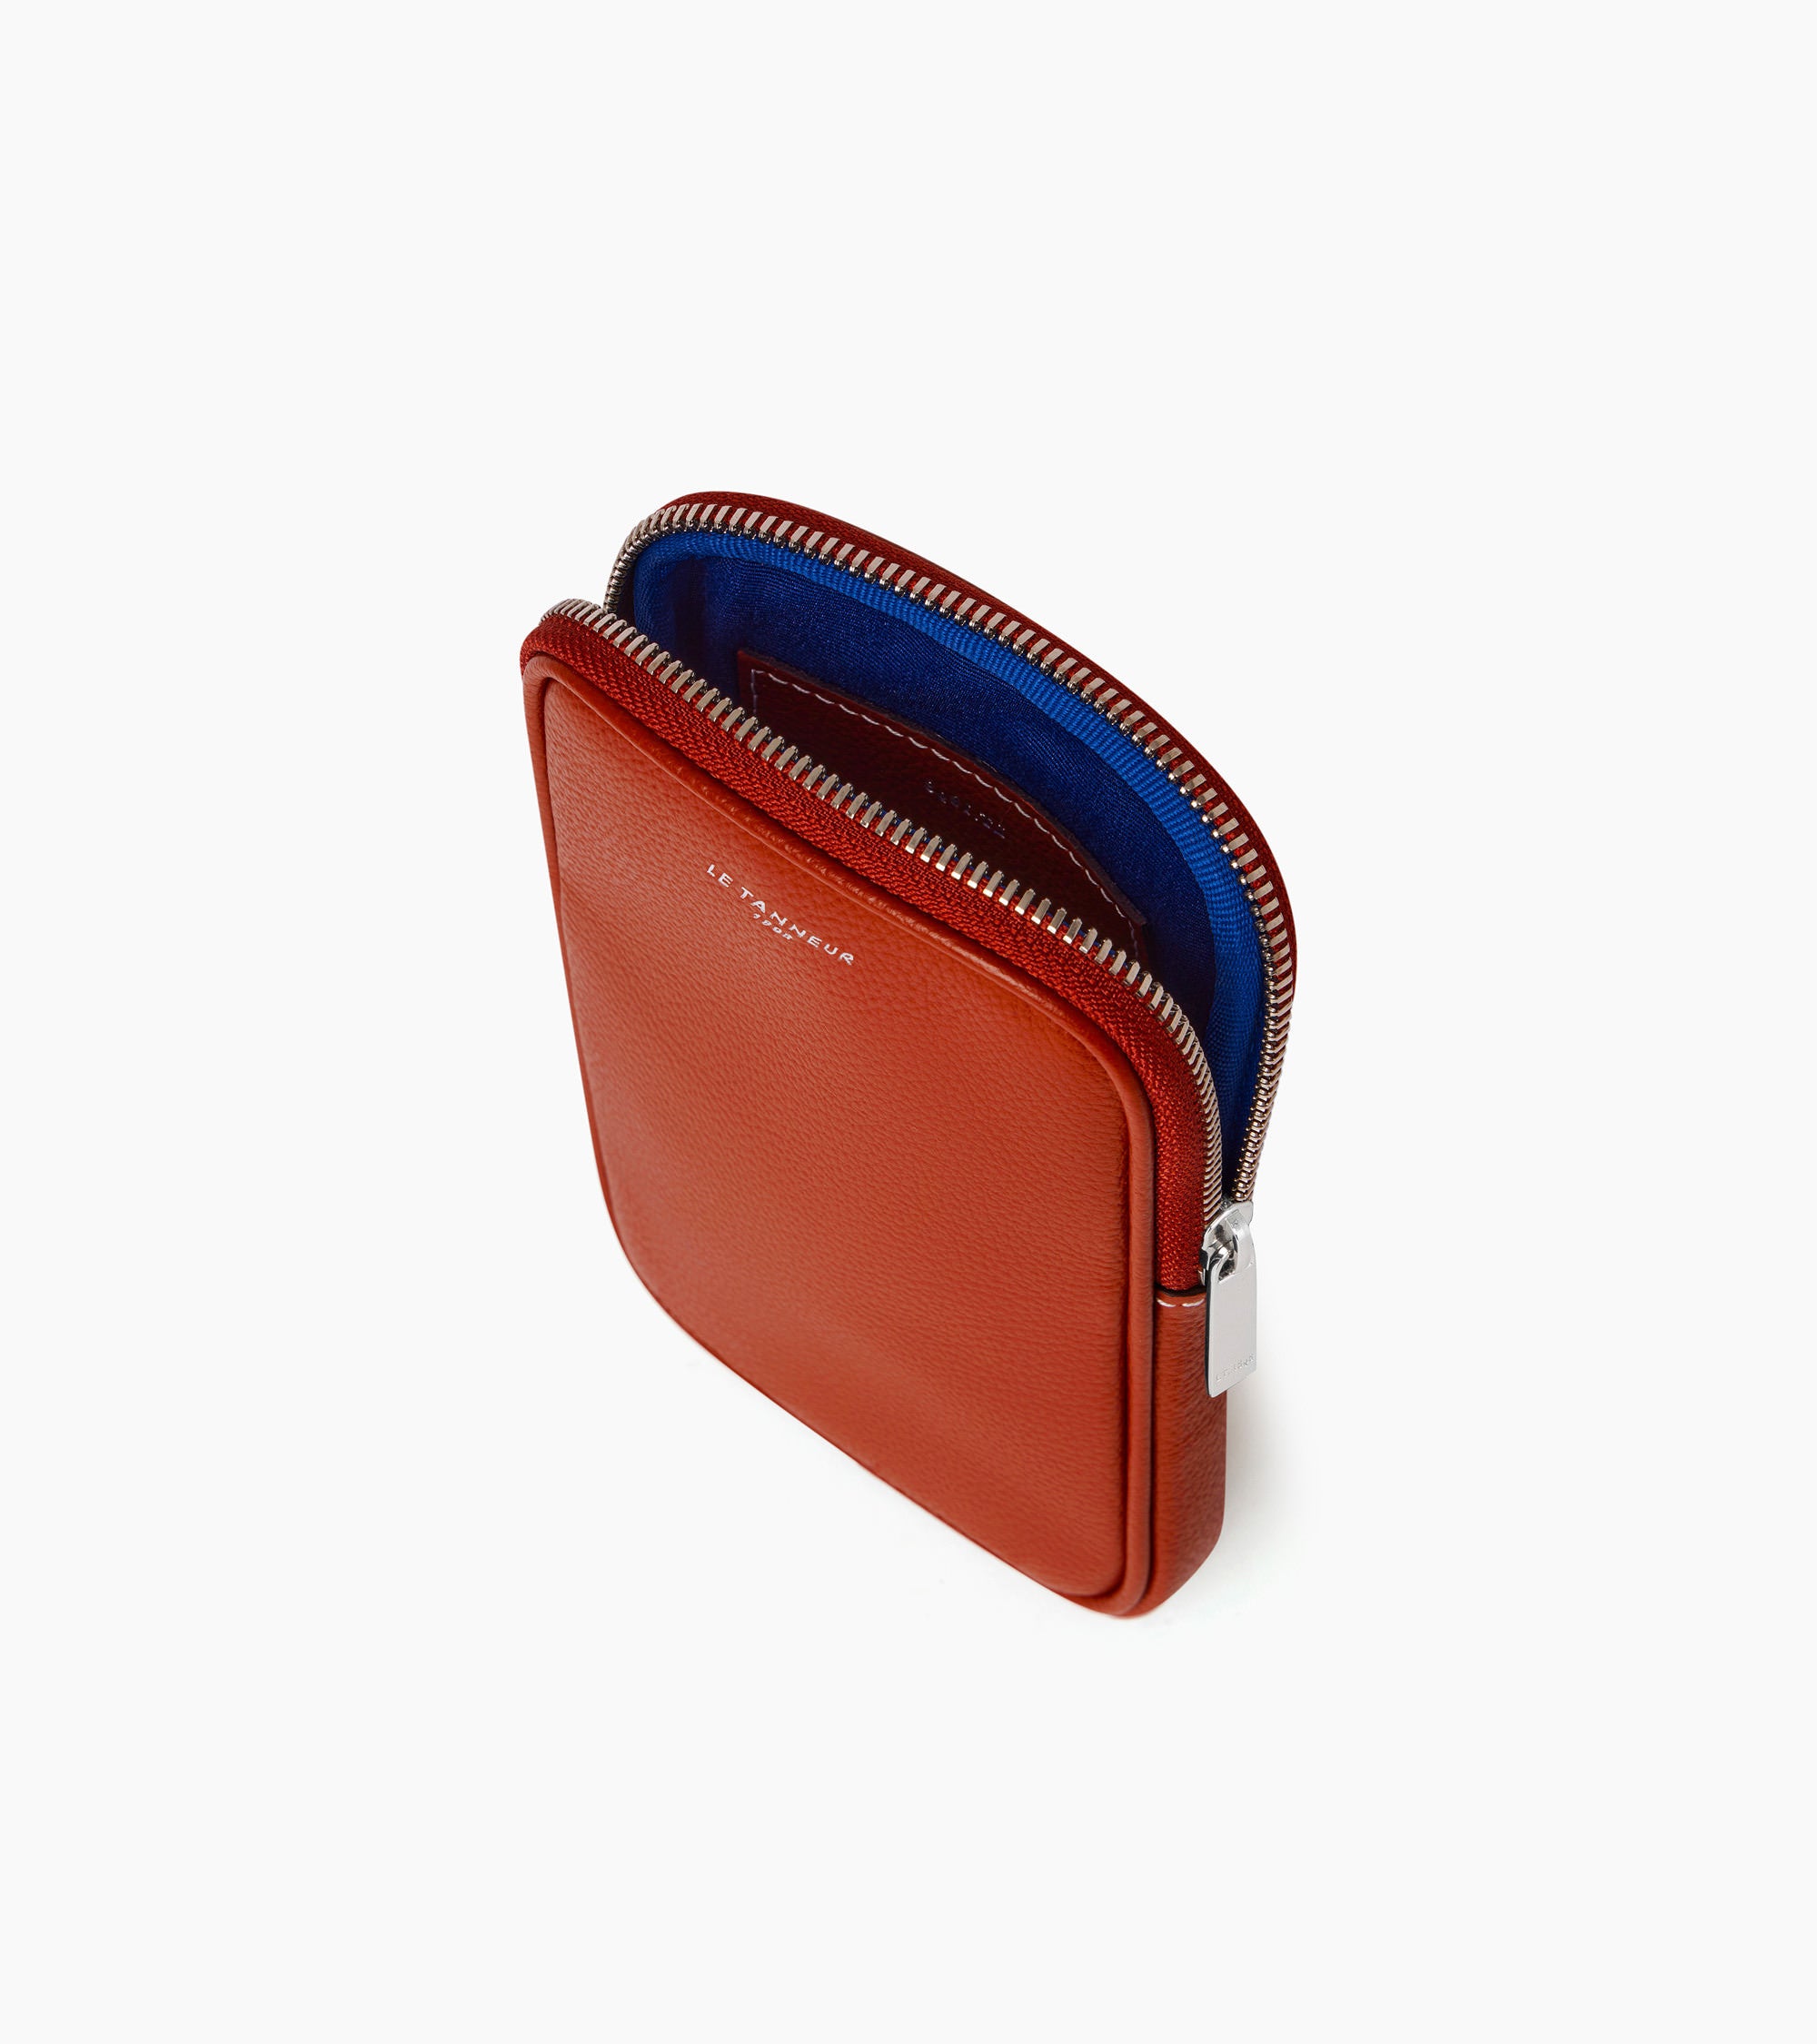 Emile phone case in grained leather